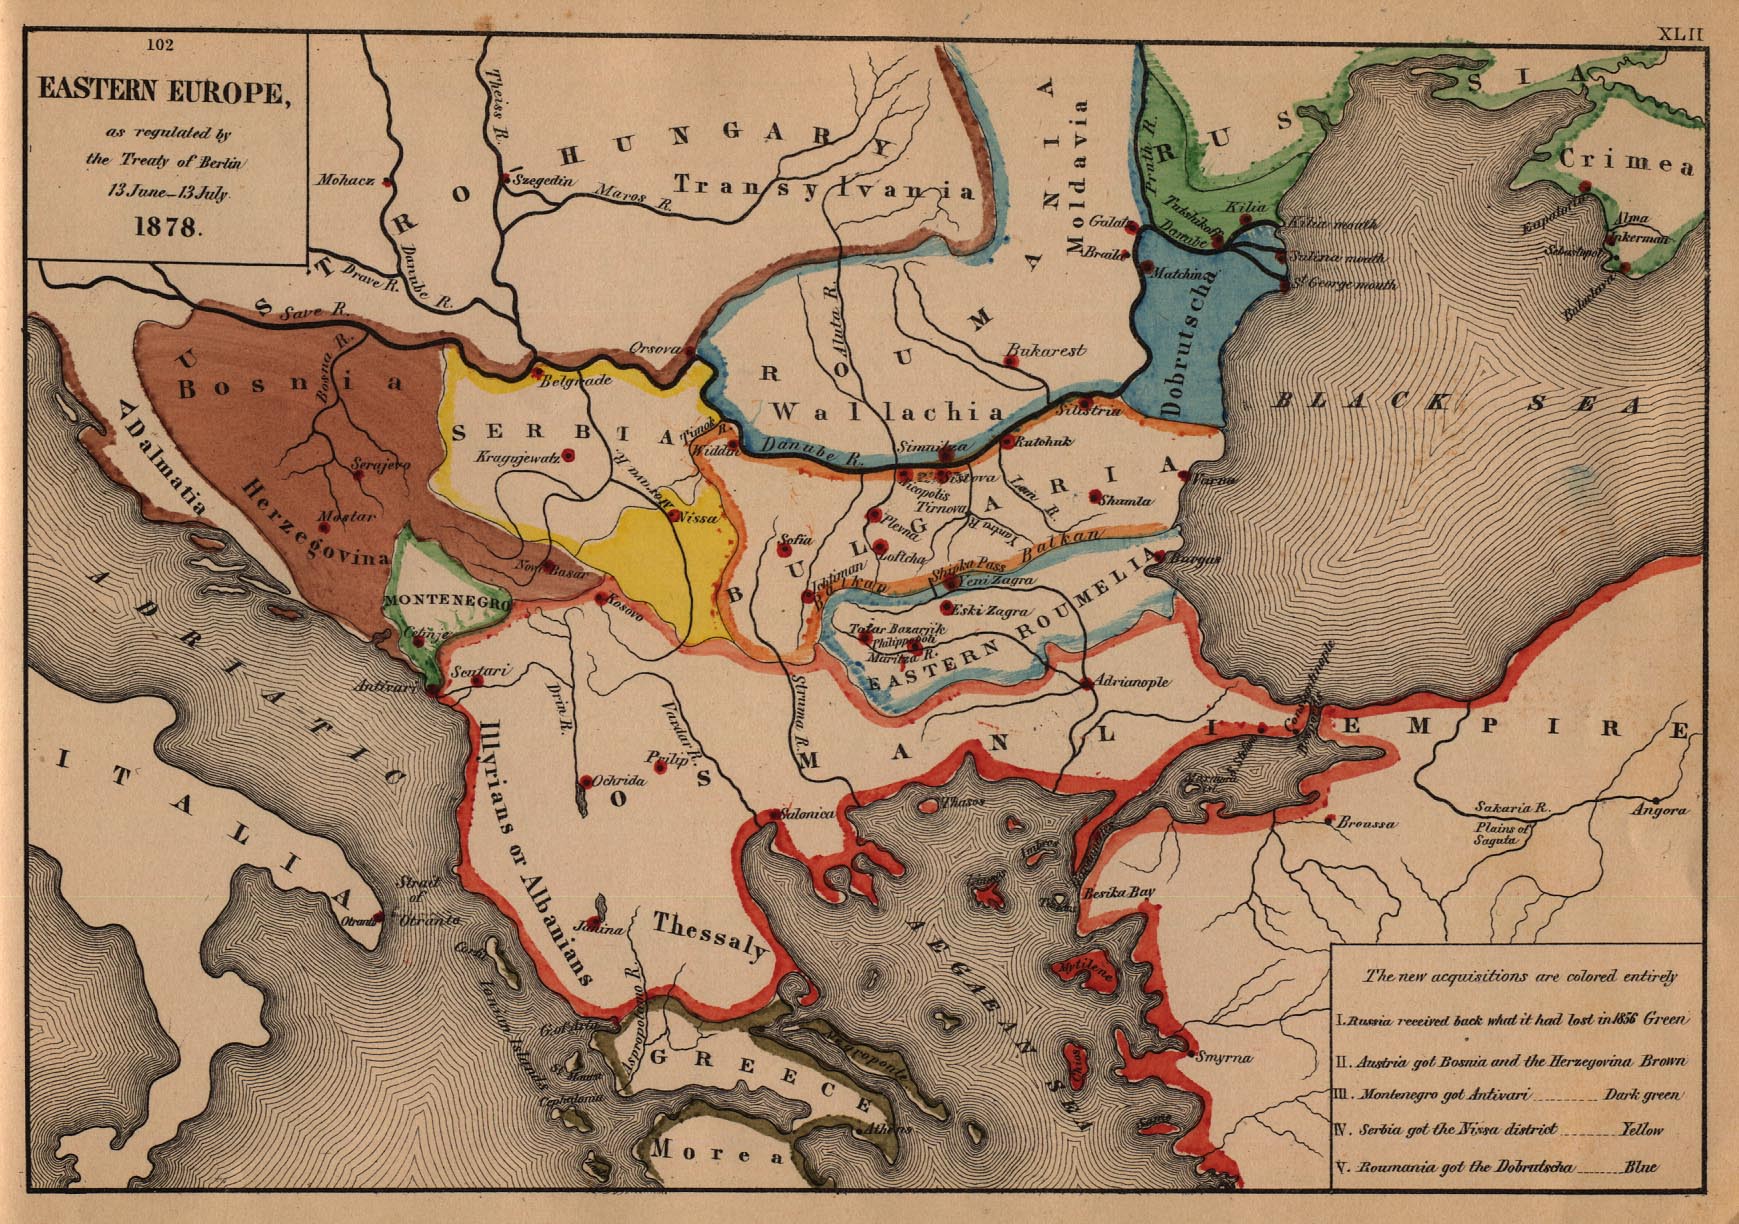 Historical Map of Balkans. Eastern Europe 1878 (468K) Map from "An Historical Atlas" by Robert H. Labberton, E. Elaxton and Co., 1884. 